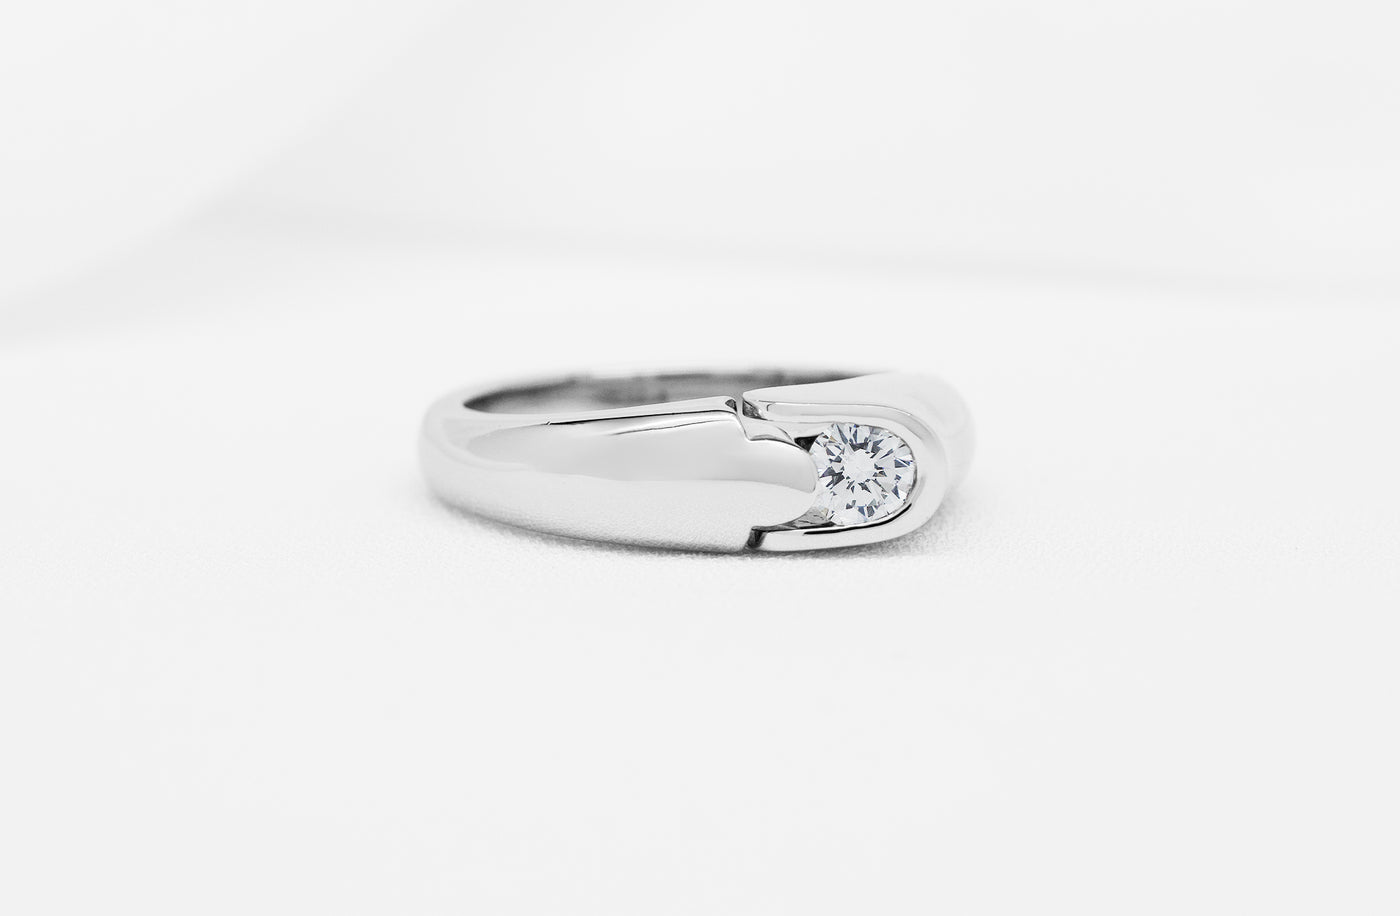 Inspired Collection, Jigsaw, Jigsawd, , Platinum, 18k, 18ct White gold, brilliant cut diamond, round cut, specialist, jewellery, jewelry, engagement ring, ring design, inspired design, offset design, ready to ship, ready to go, 0.33ct, G colour, color, VS2 clarity  Edit alt text